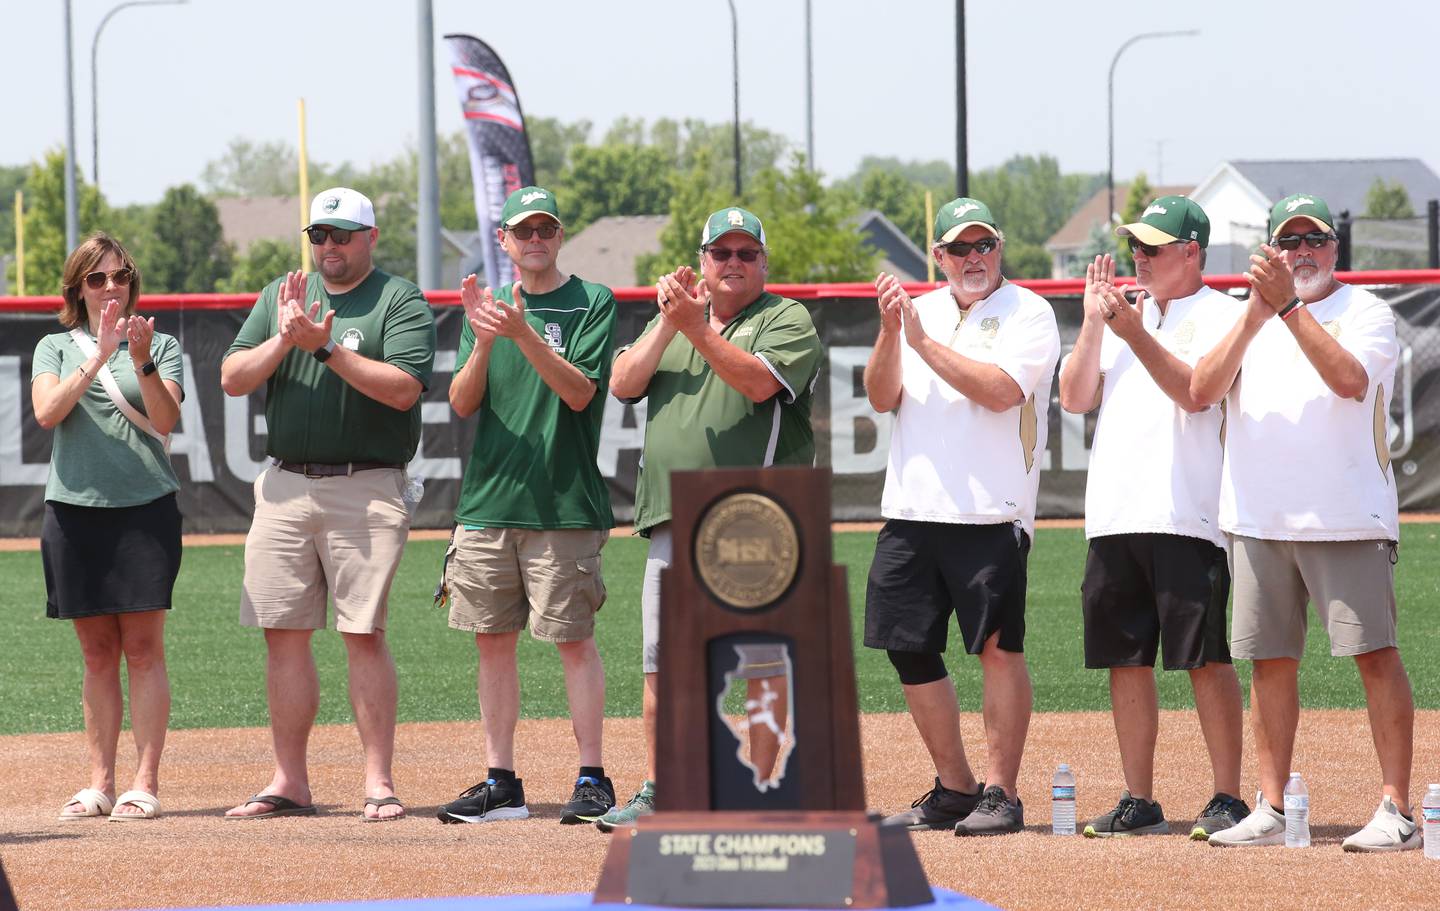 St. Bede administration and coaches applaud after winning the Class 1A State championship over Illini Bluffs on Saturday, June 3, 2023 at the Louisville Slugger Sports Complex in Peoria.